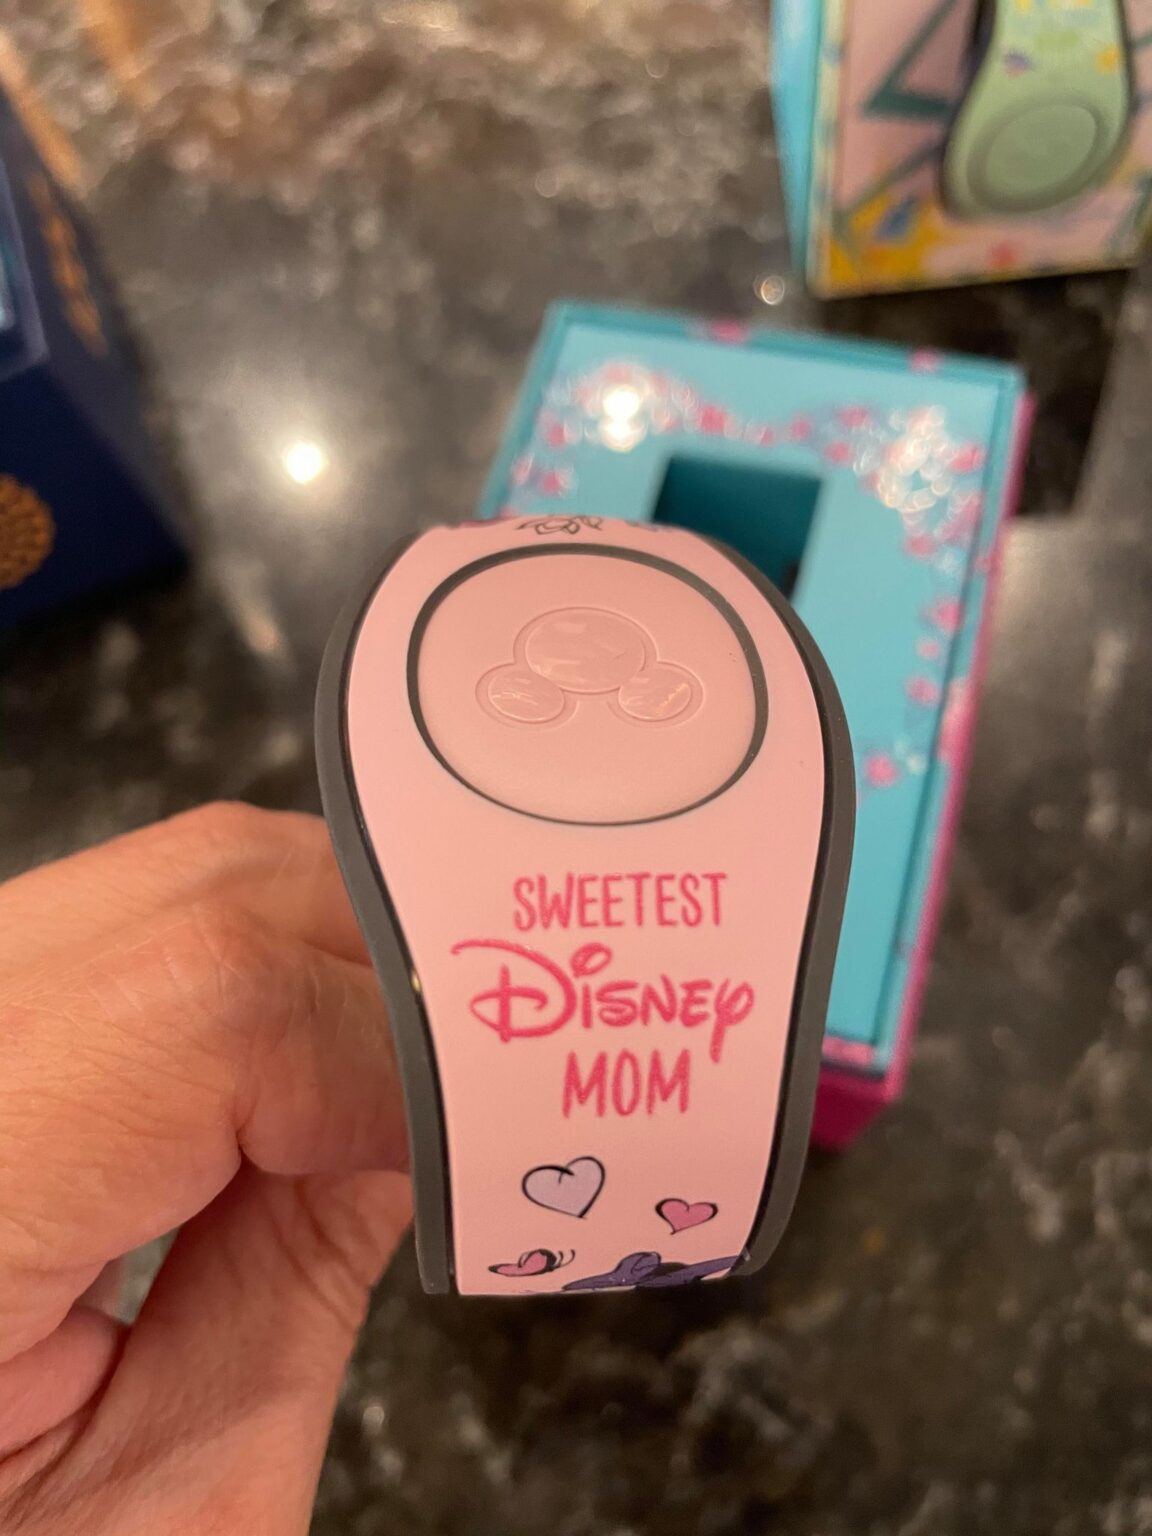 This Limited Edition Sweetest Disney Mom MagicBand Is The